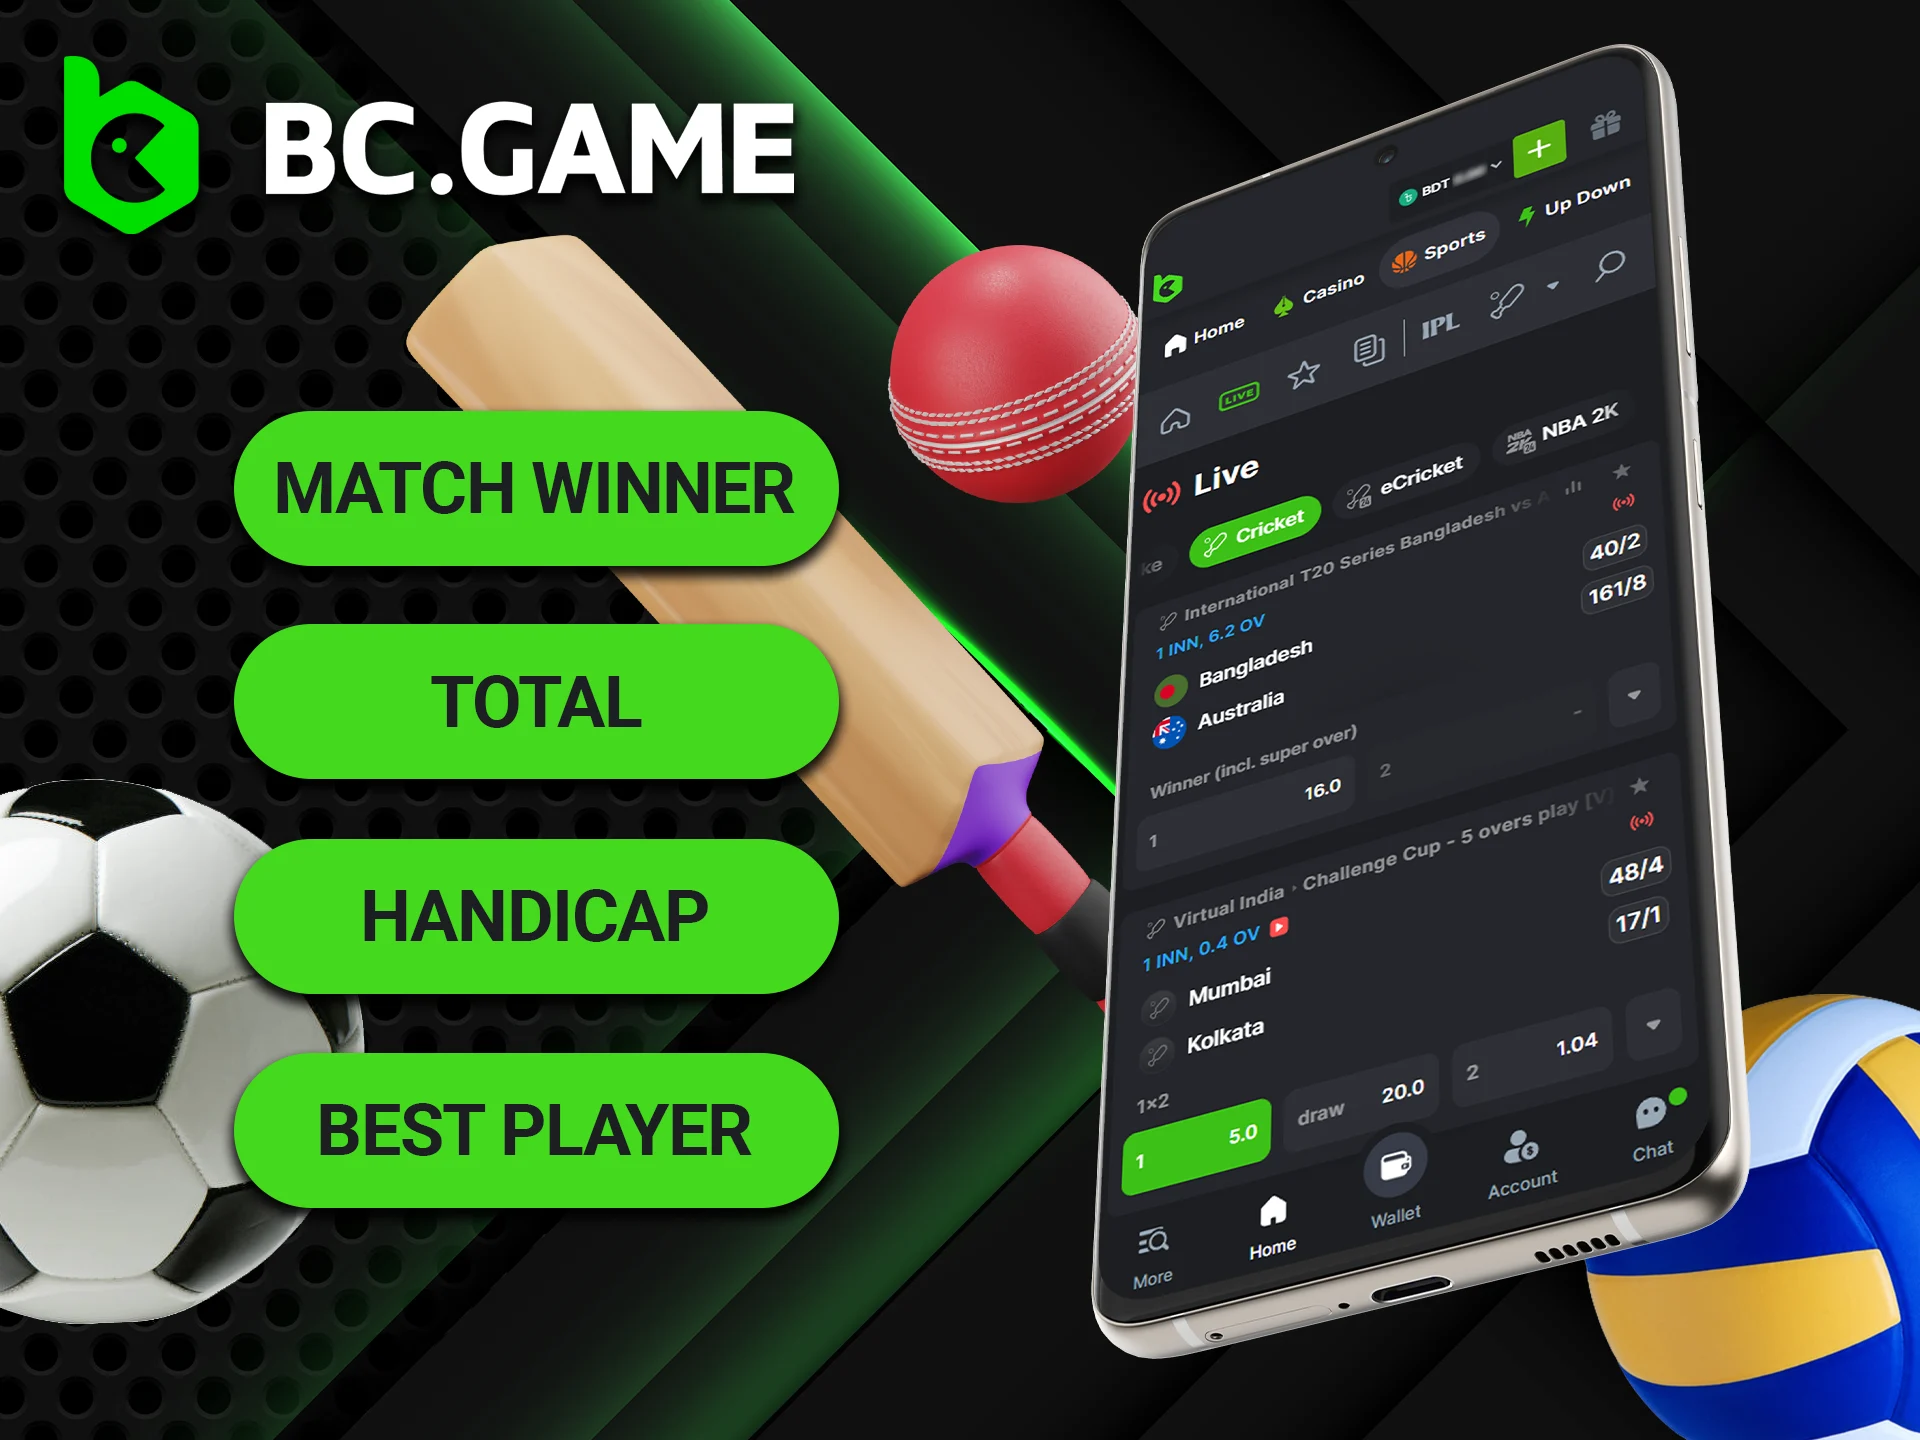 Familiarize yourself with the types of bets on sports on the BC GAME app.